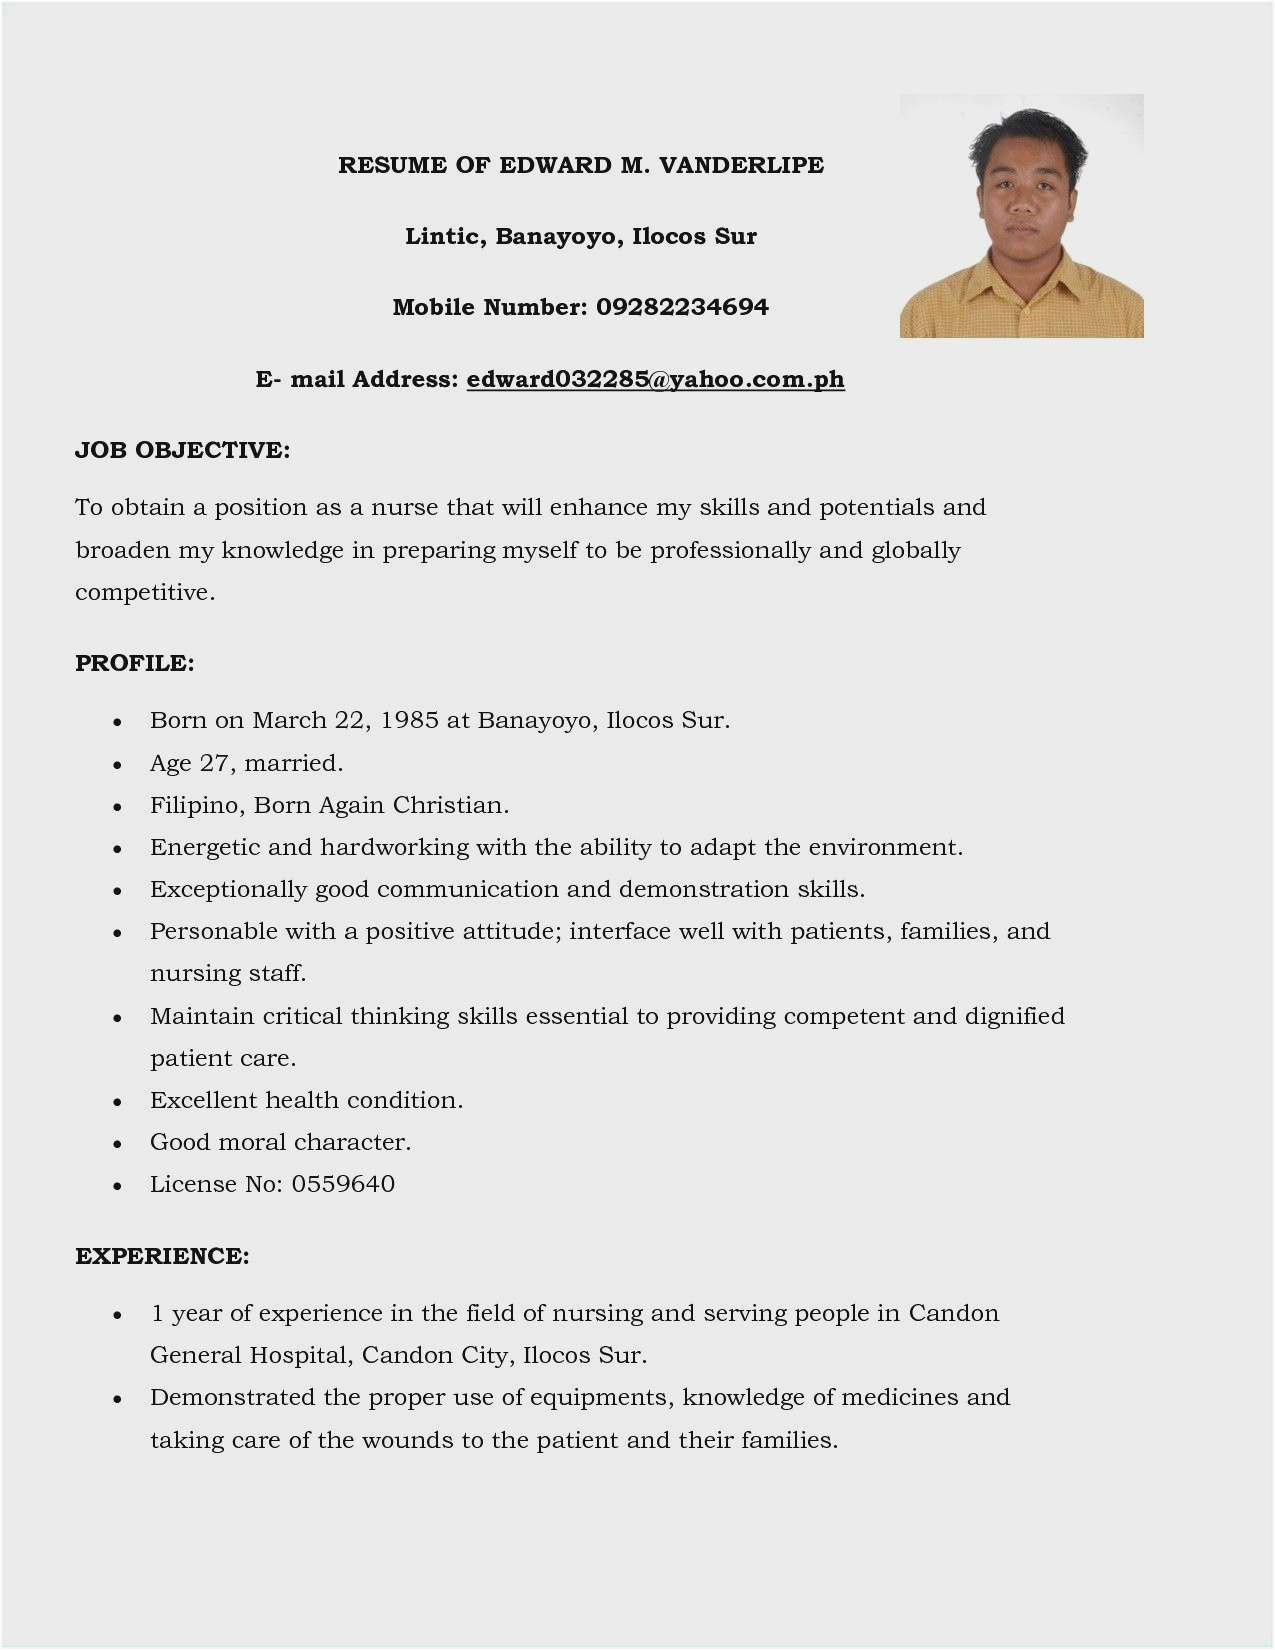 Sample Resume for Filipino Nurses Applying Abroad Resume with Picture Philippines